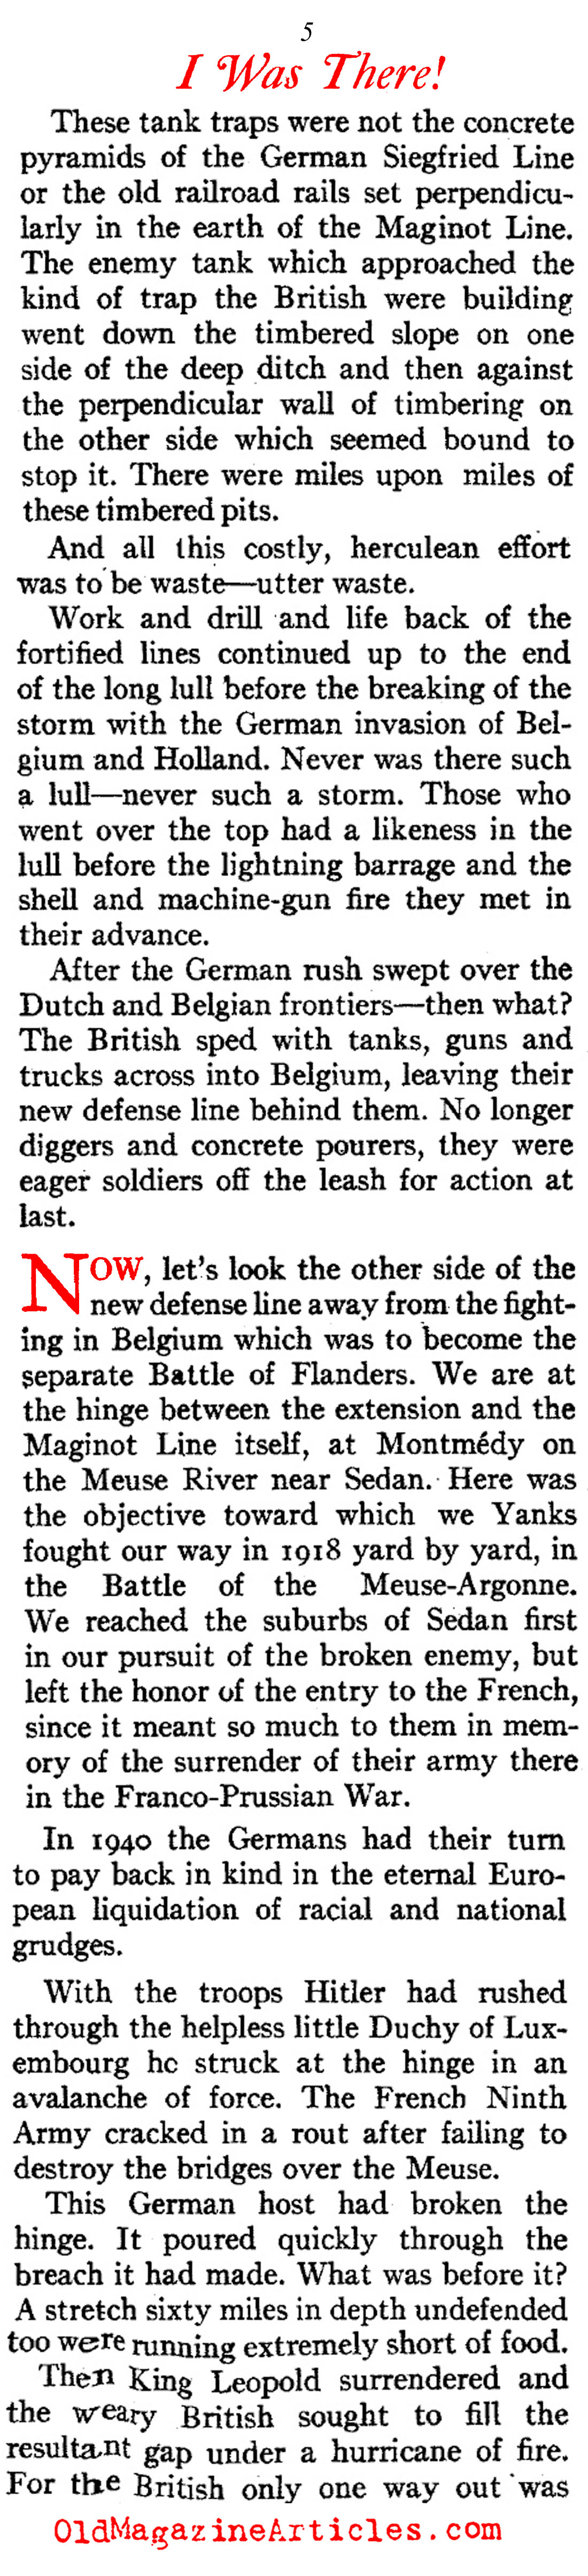 With the French as Their Army Collapsed  (American Legion Weekly, 1940)